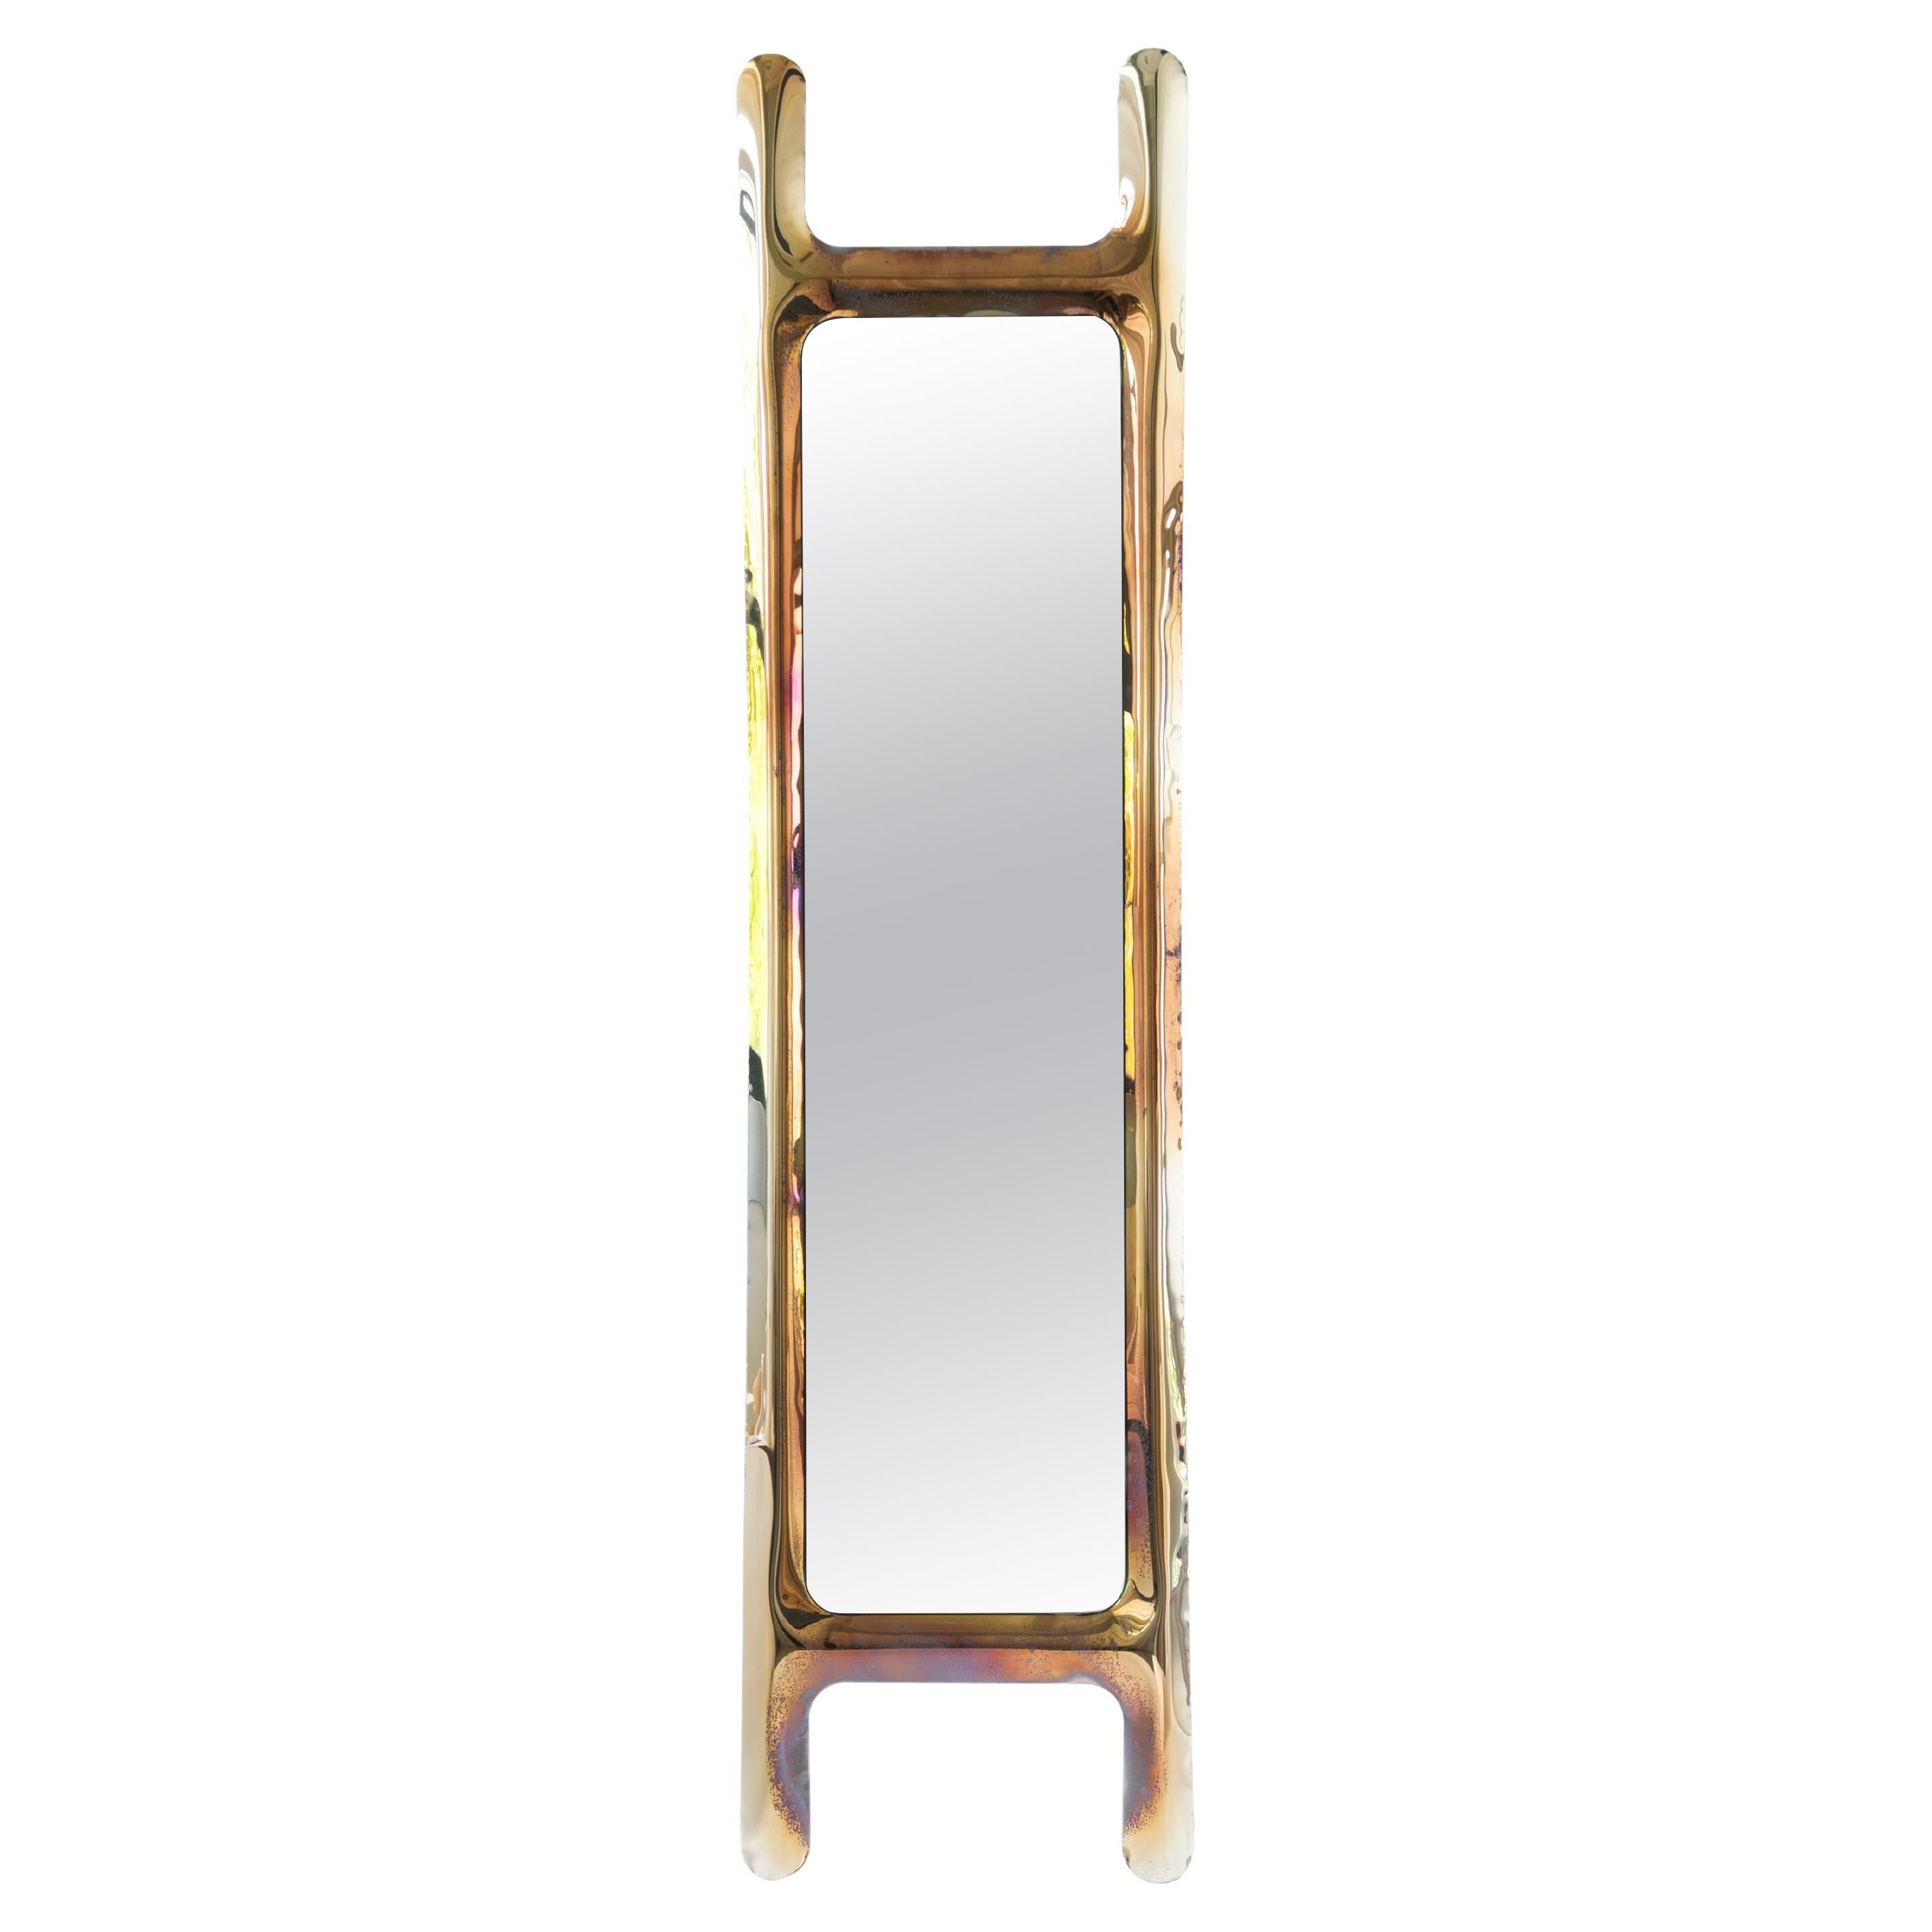 Contemporary Mirror 'Drab' by Zieta, Flamed Gold For Sale